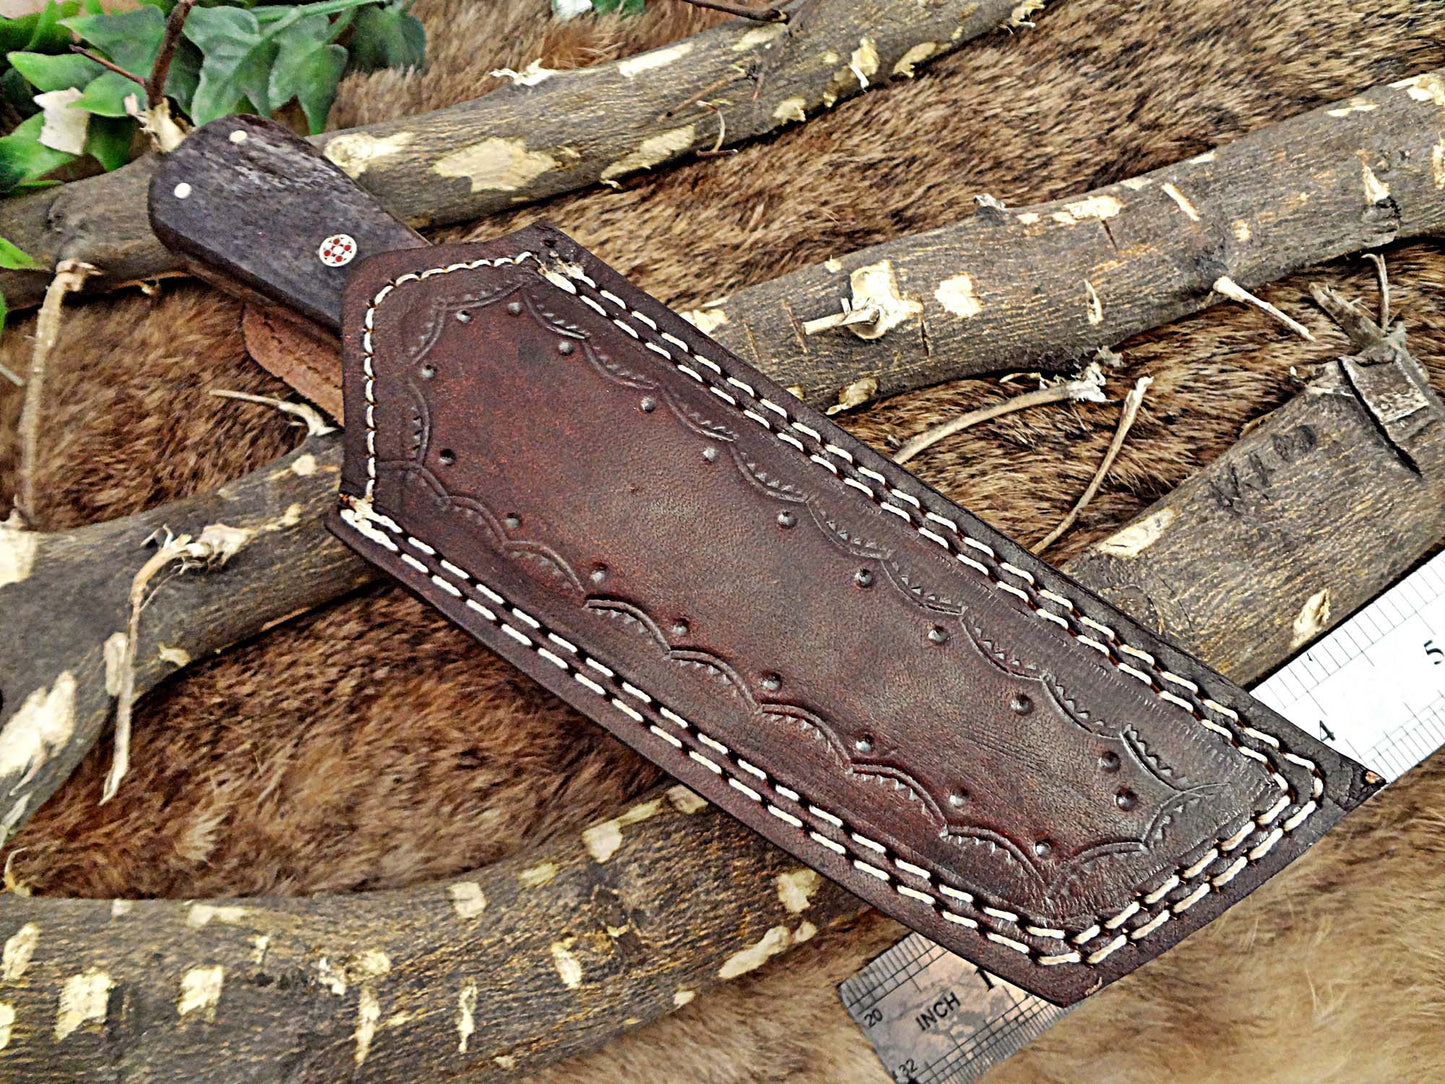 8" Long hand forged Damascus steel full tang Tanto blade pocket Knife, Available in 3 scales, includes Cow leather sheath